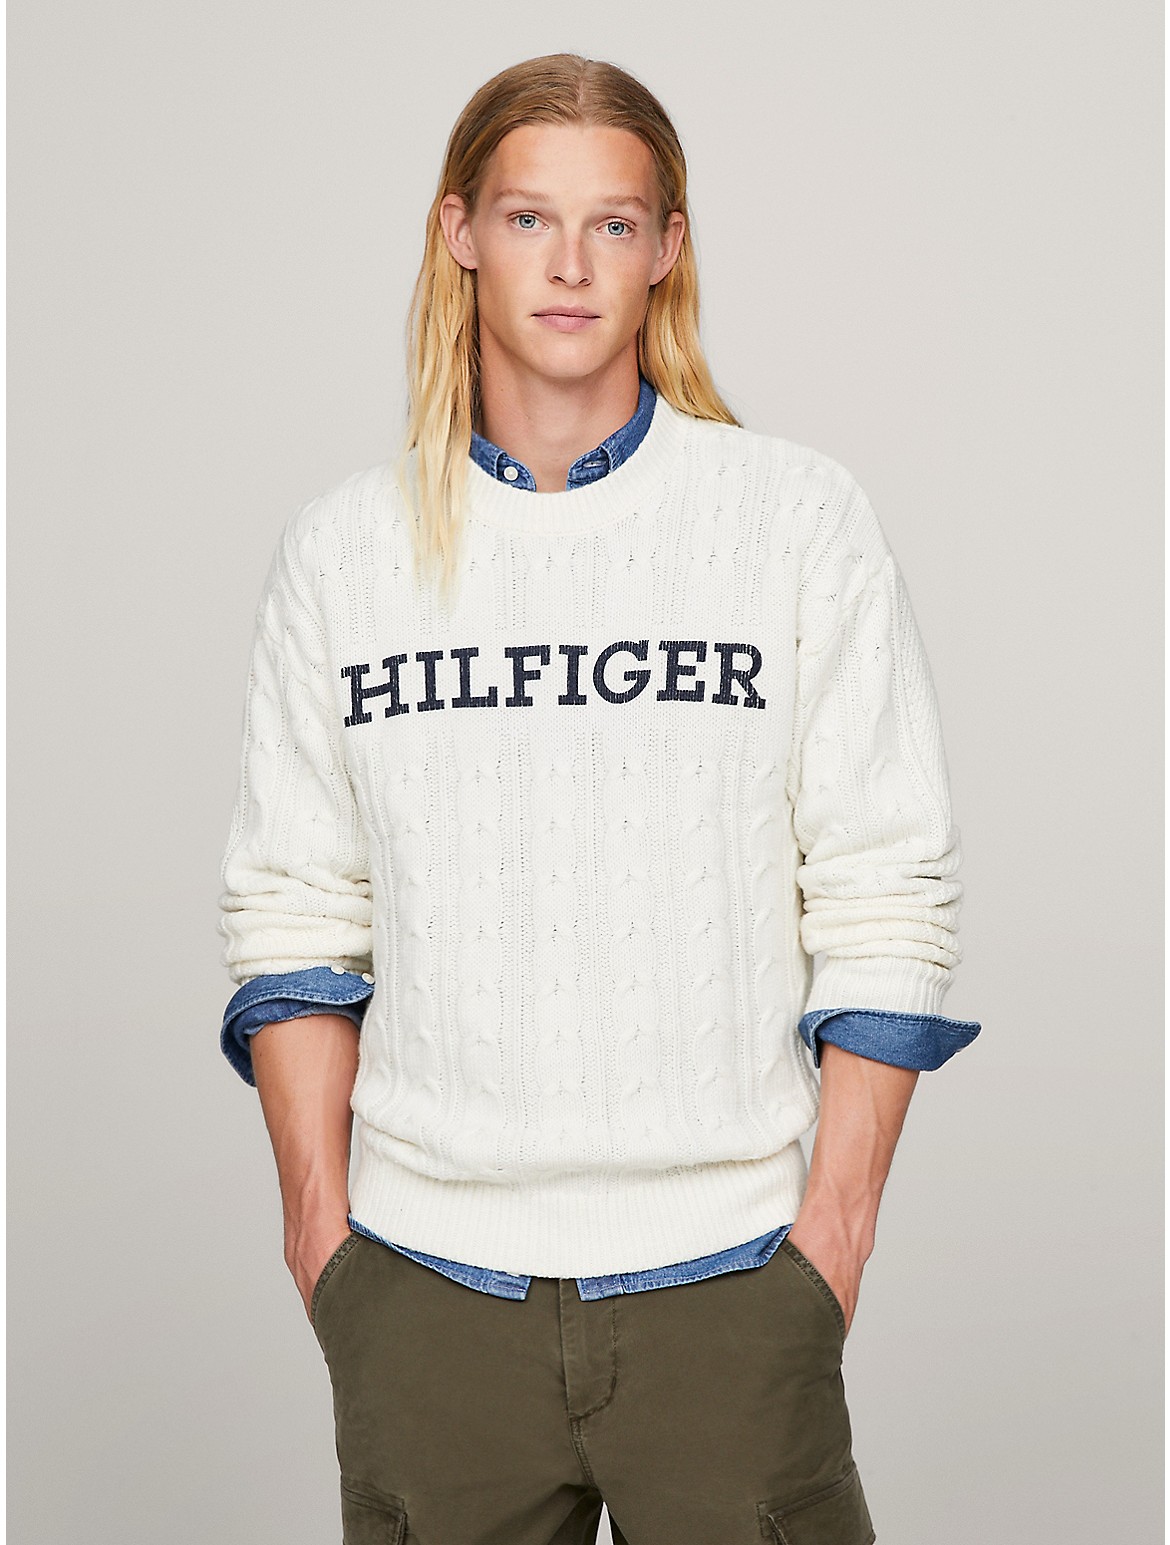 Tommy Hilfiger Men's Monotype Logo Cable Knit Sweater